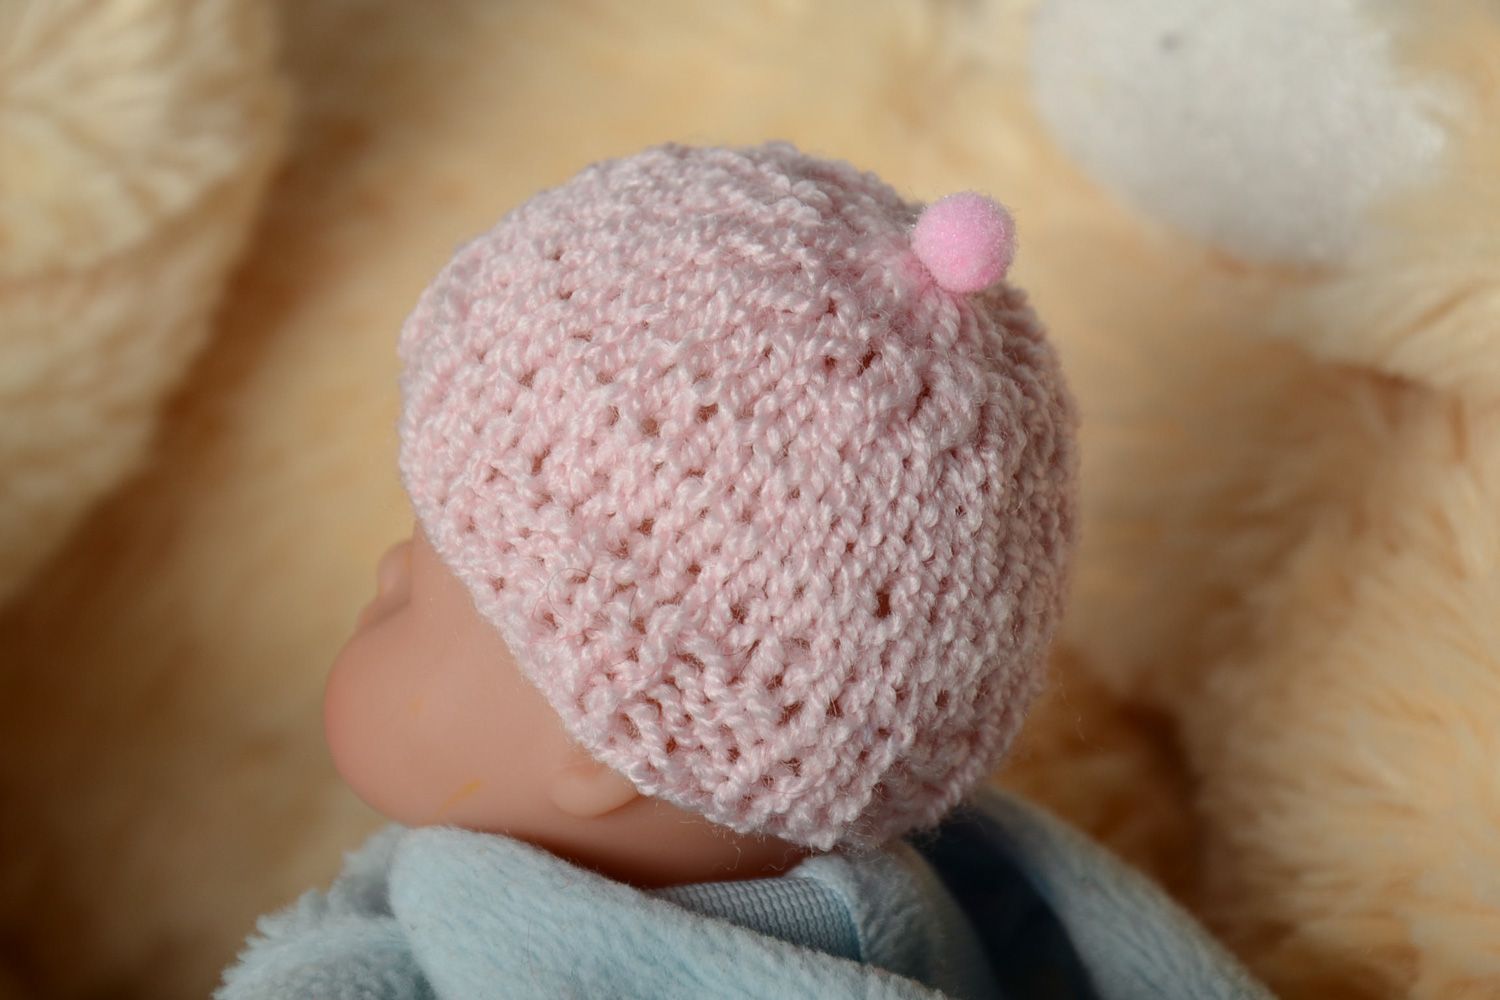 Handmade pink knitted Easter egg cozy photo 1